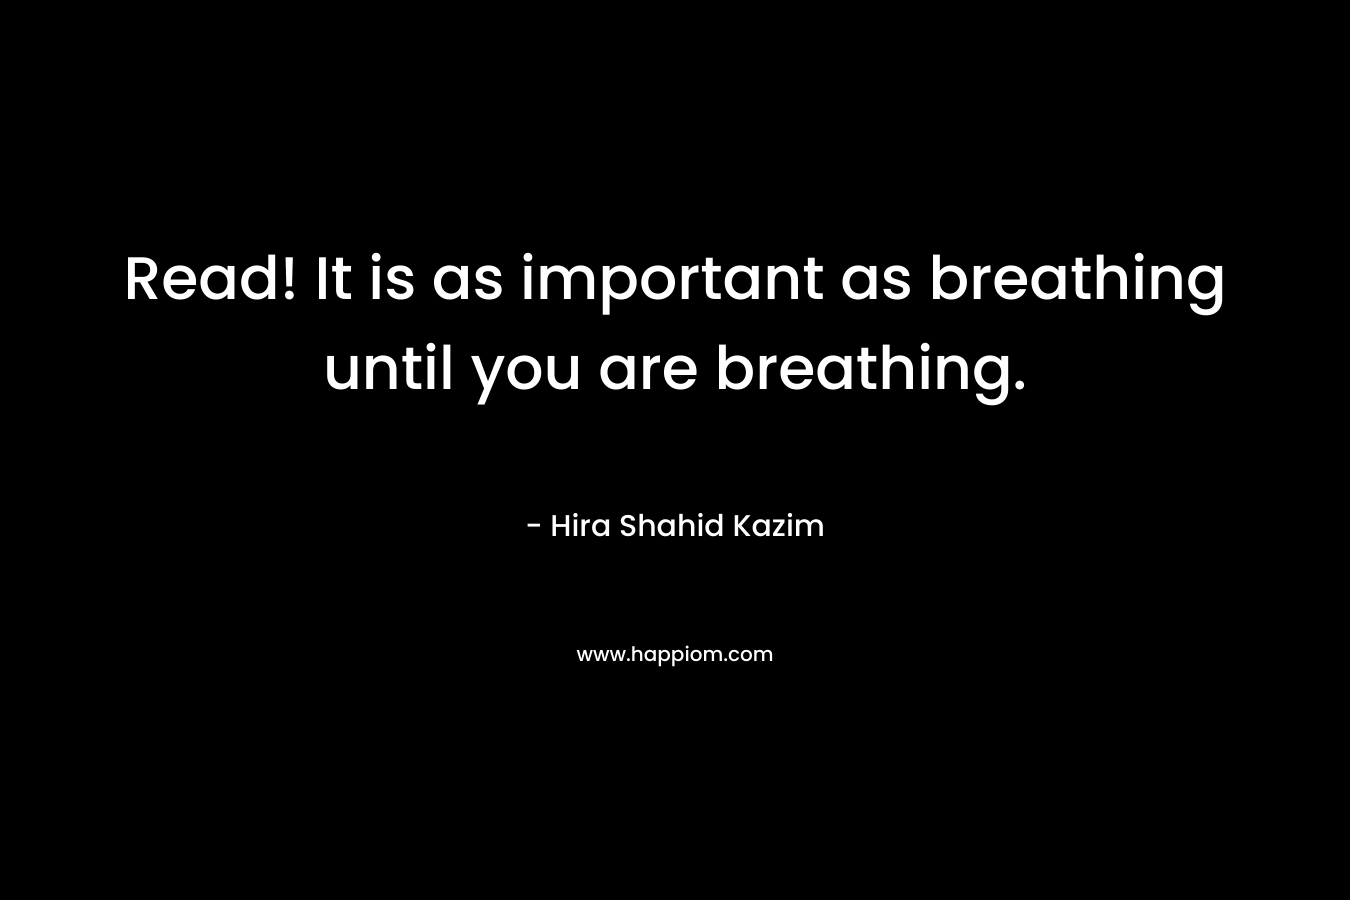 Read! It is as important as breathing until you are breathing.